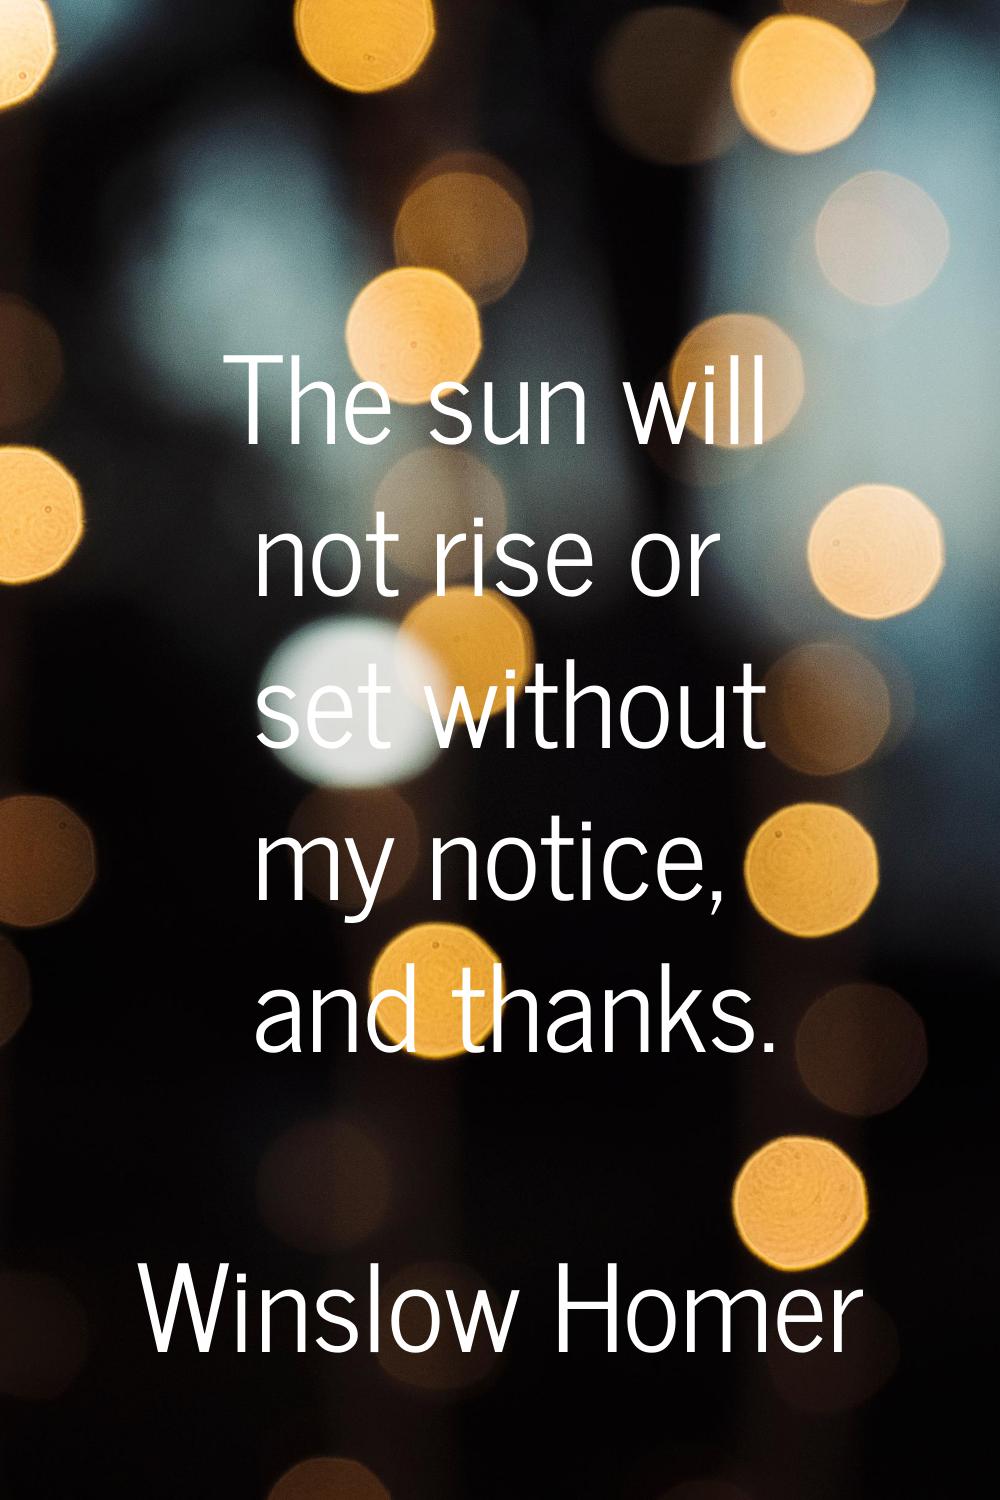 The sun will not rise or set without my notice, and thanks.